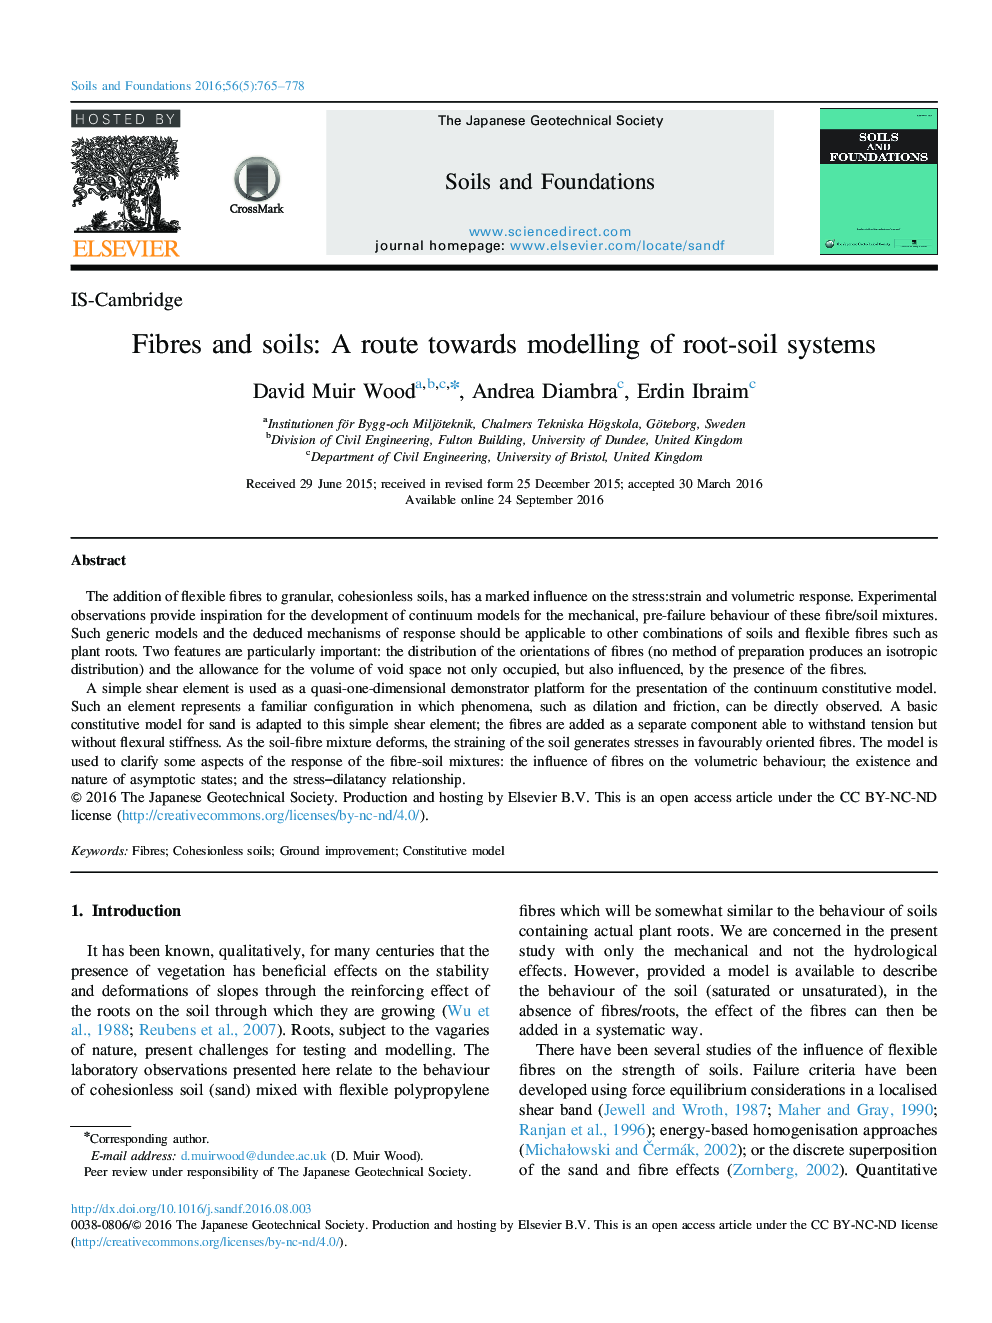 IS-CambridgeFibres and soils: A route towards modelling of root-soil systems